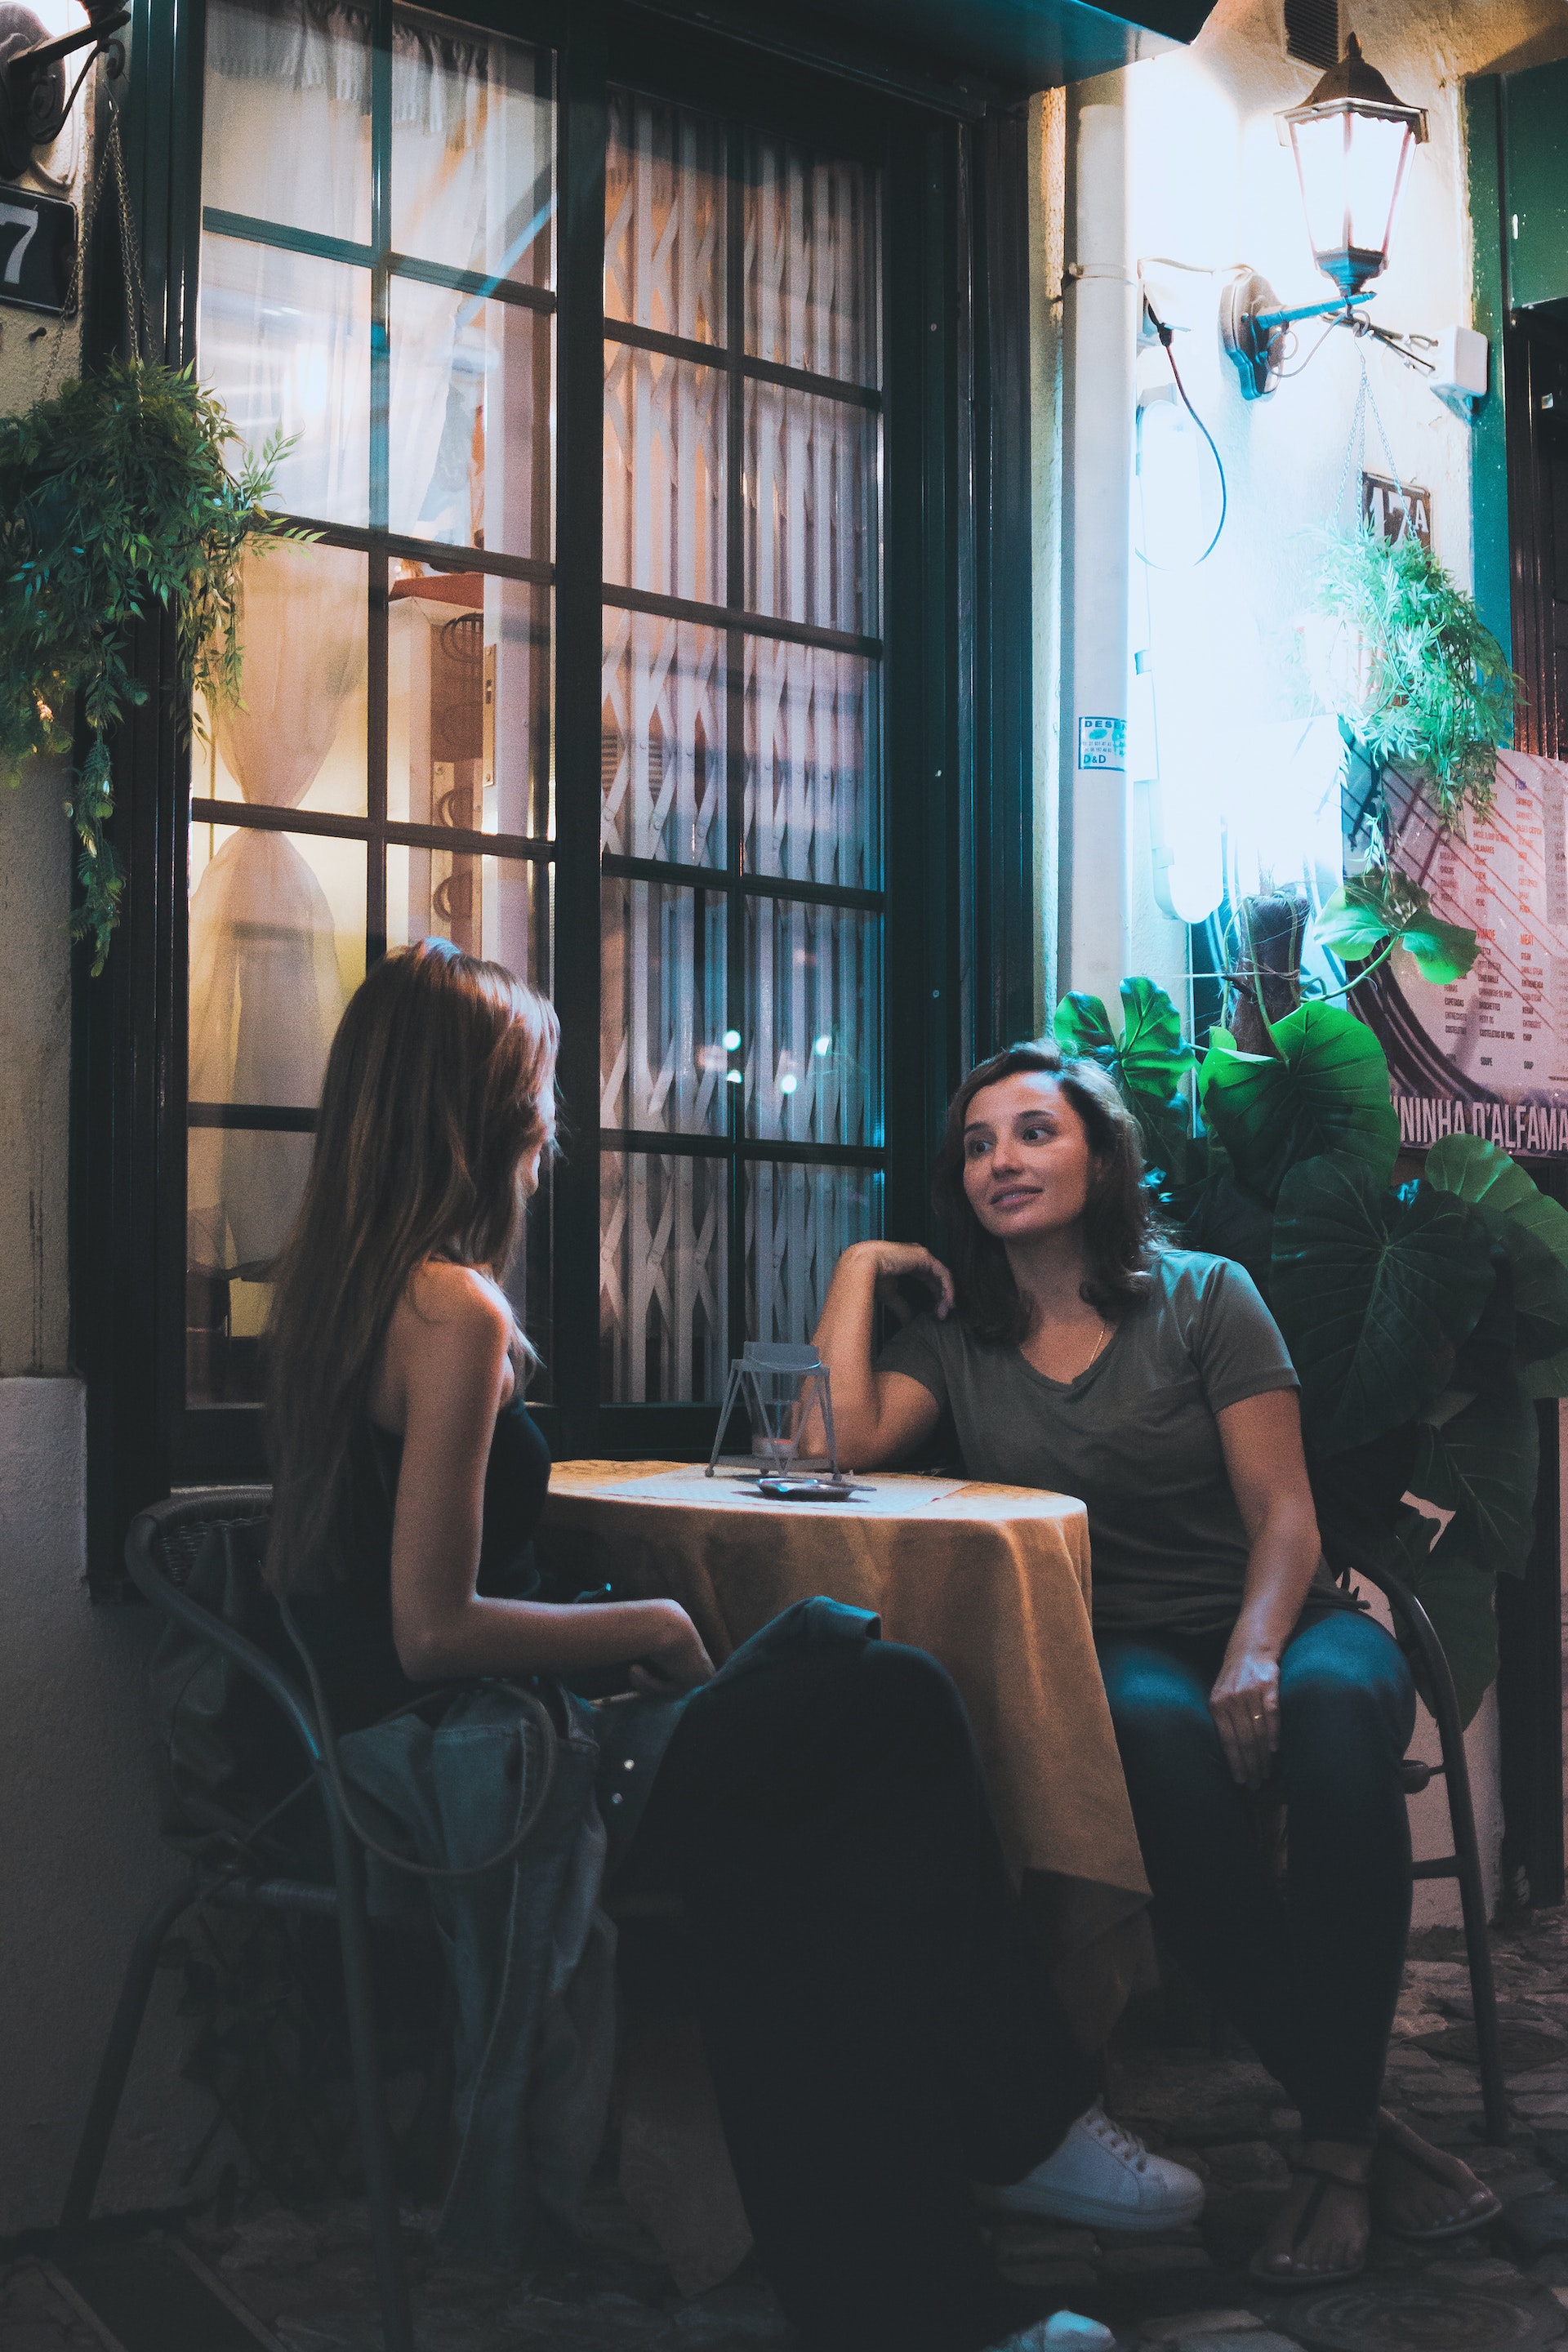 Two women talking while sitting at a table | Source: Pexels